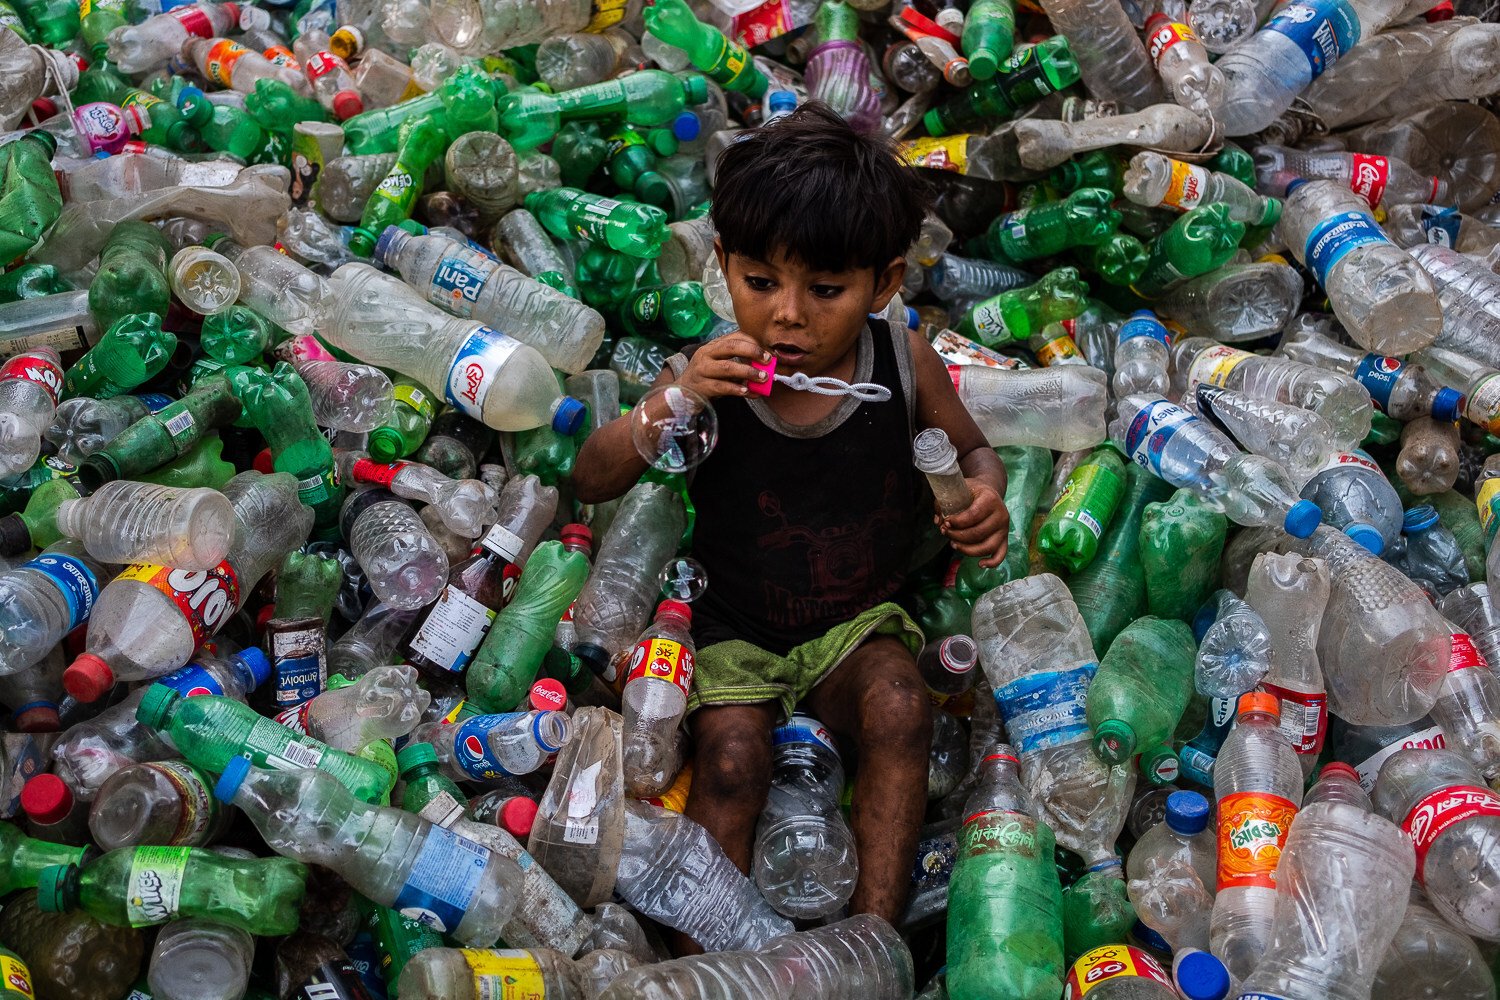 A boy plays with a bubble blower on a stack of plastic bottles inside a recycling factory in Dhaka, Bangladesh, on March 15. Photo: ZUMA Wire/dpa